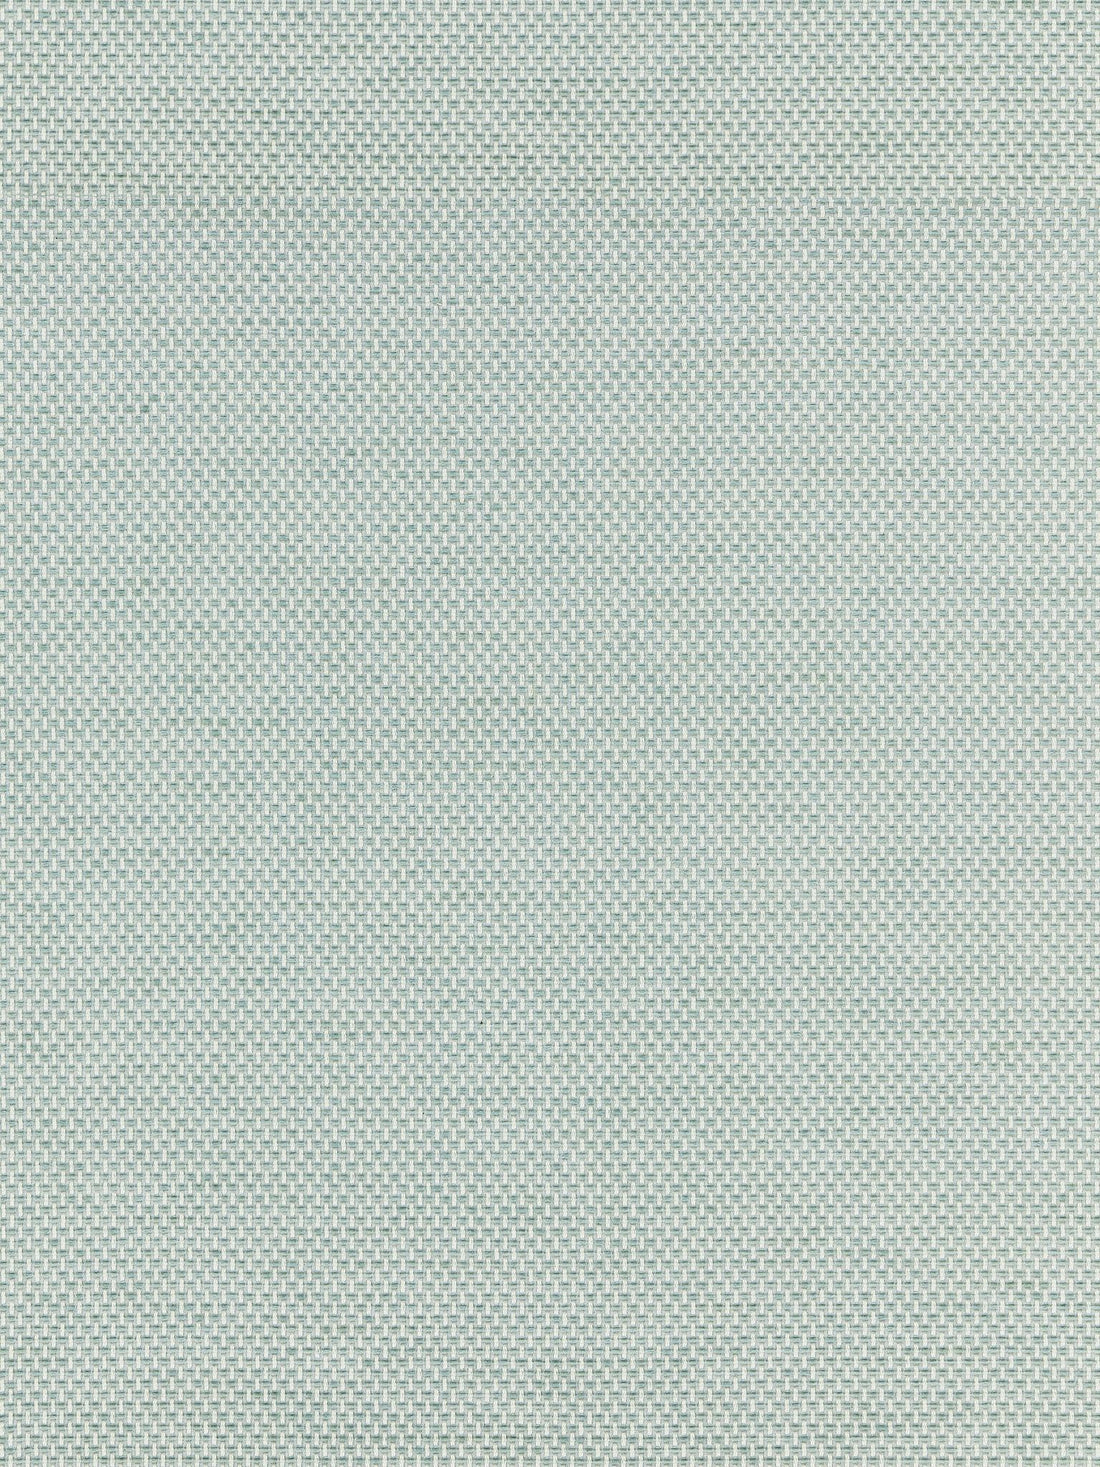 Berkshire Weave fabric in mineral color - pattern number BK 0006K65115 - by Scalamandre in the Old World Weavers collection